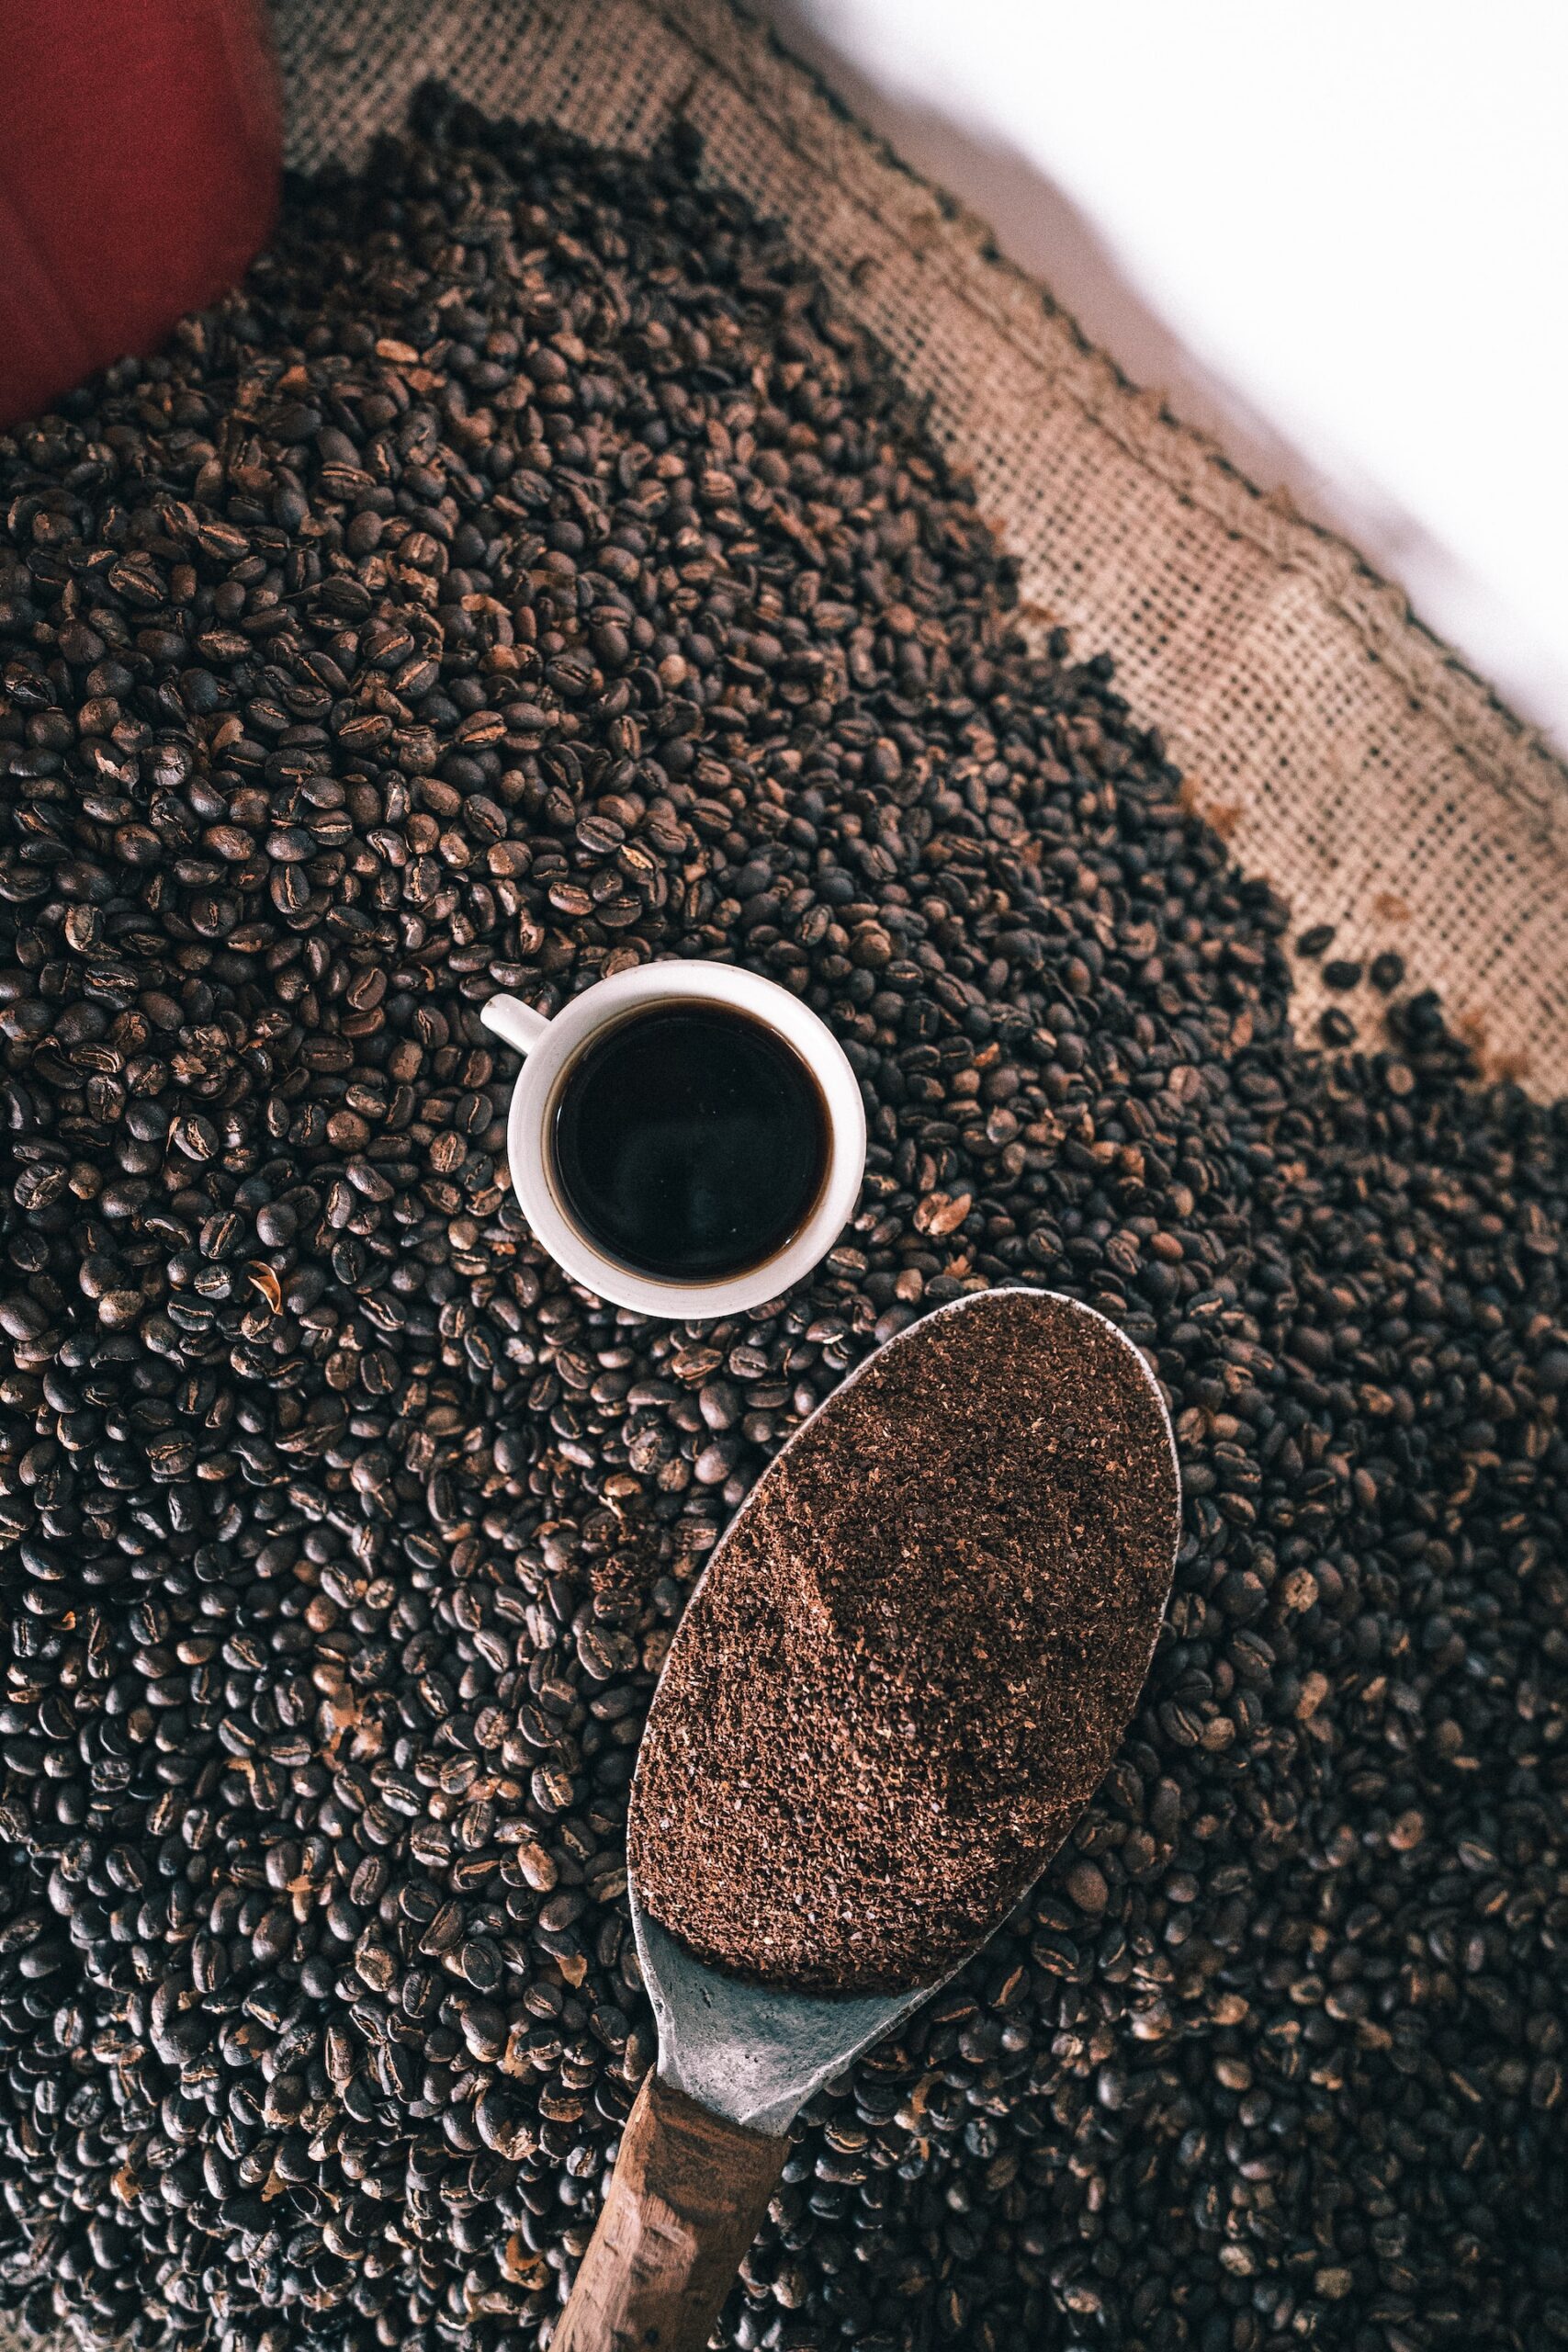 Overhead view of a sack of coffee beans with a cup of coffee sitting in top and a scoop filled with coffee beans.